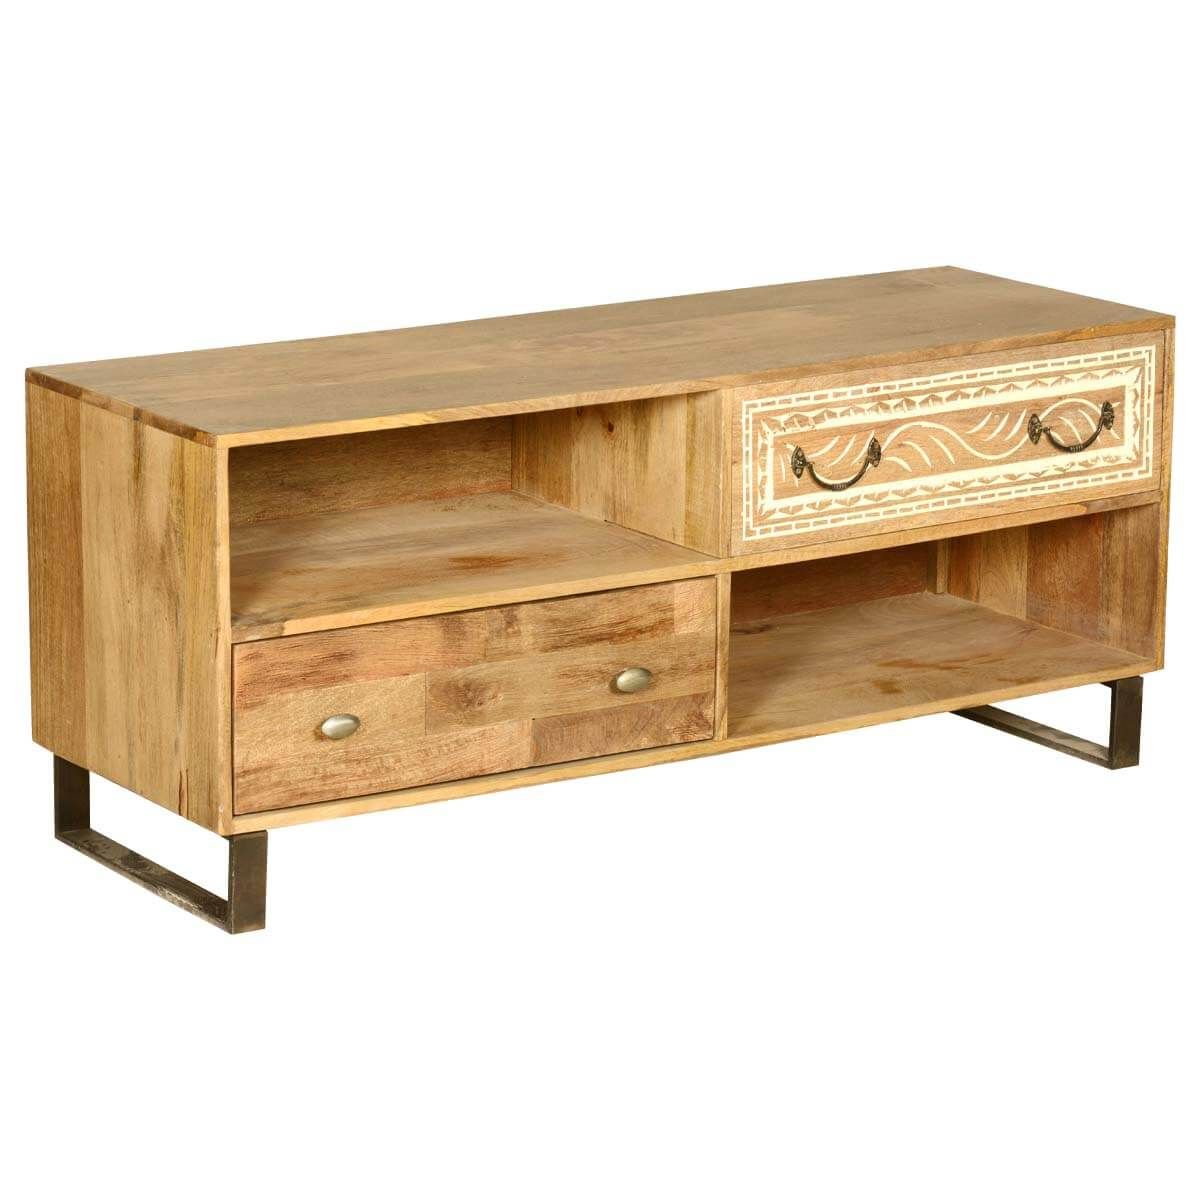 Modern Rustic Solid Wood Entertainment Center Tv Stand W 2 For Rustic Wood Tv Cabinets (View 10 of 15)